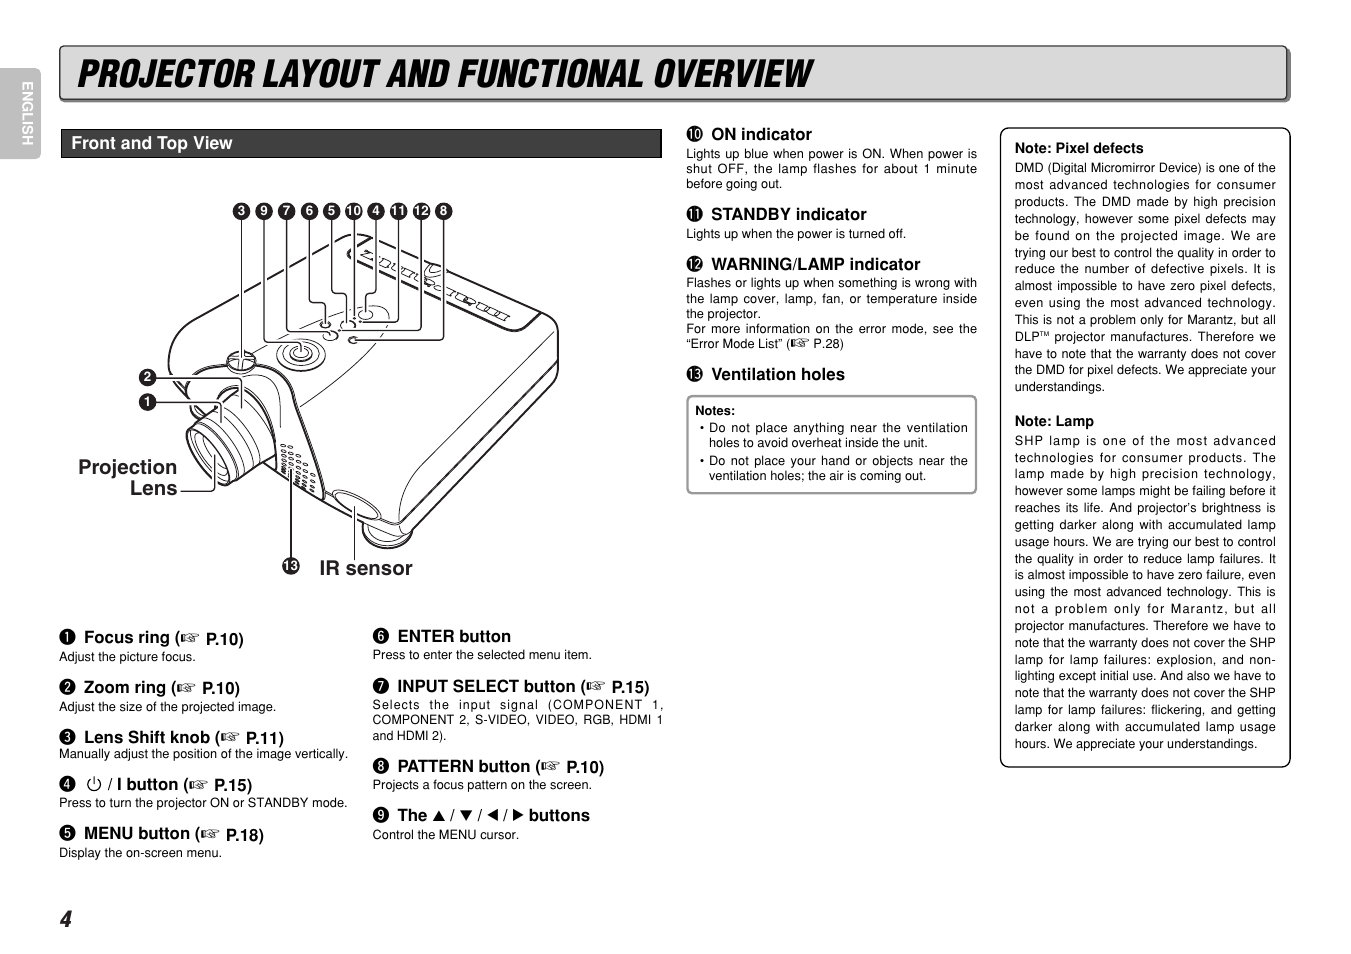 Projector layout and functional overview | Marantz VP-12S4 User Manual | Page 10 / 37